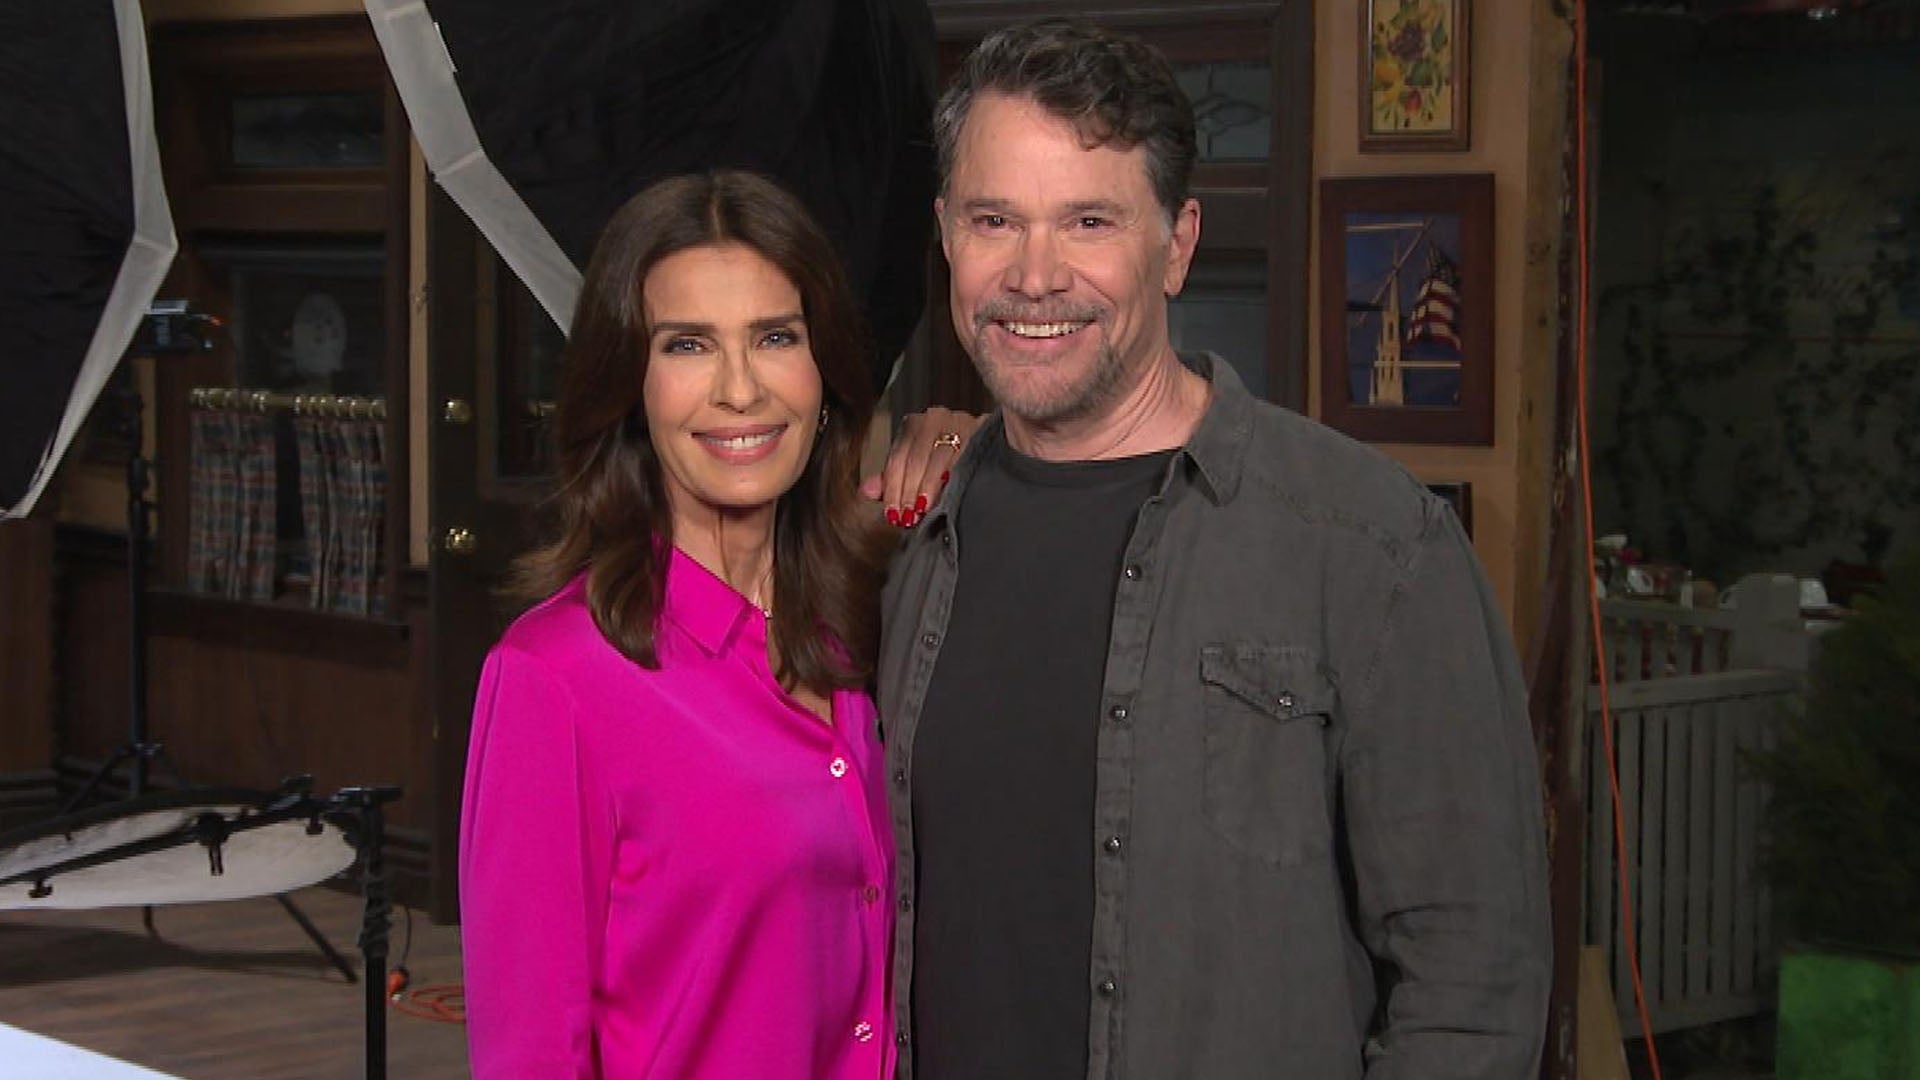 'Days of Our Lives' Kristian Alfonso and Peter Reckell Tease Edgy New Season of 'Beyond Salem'